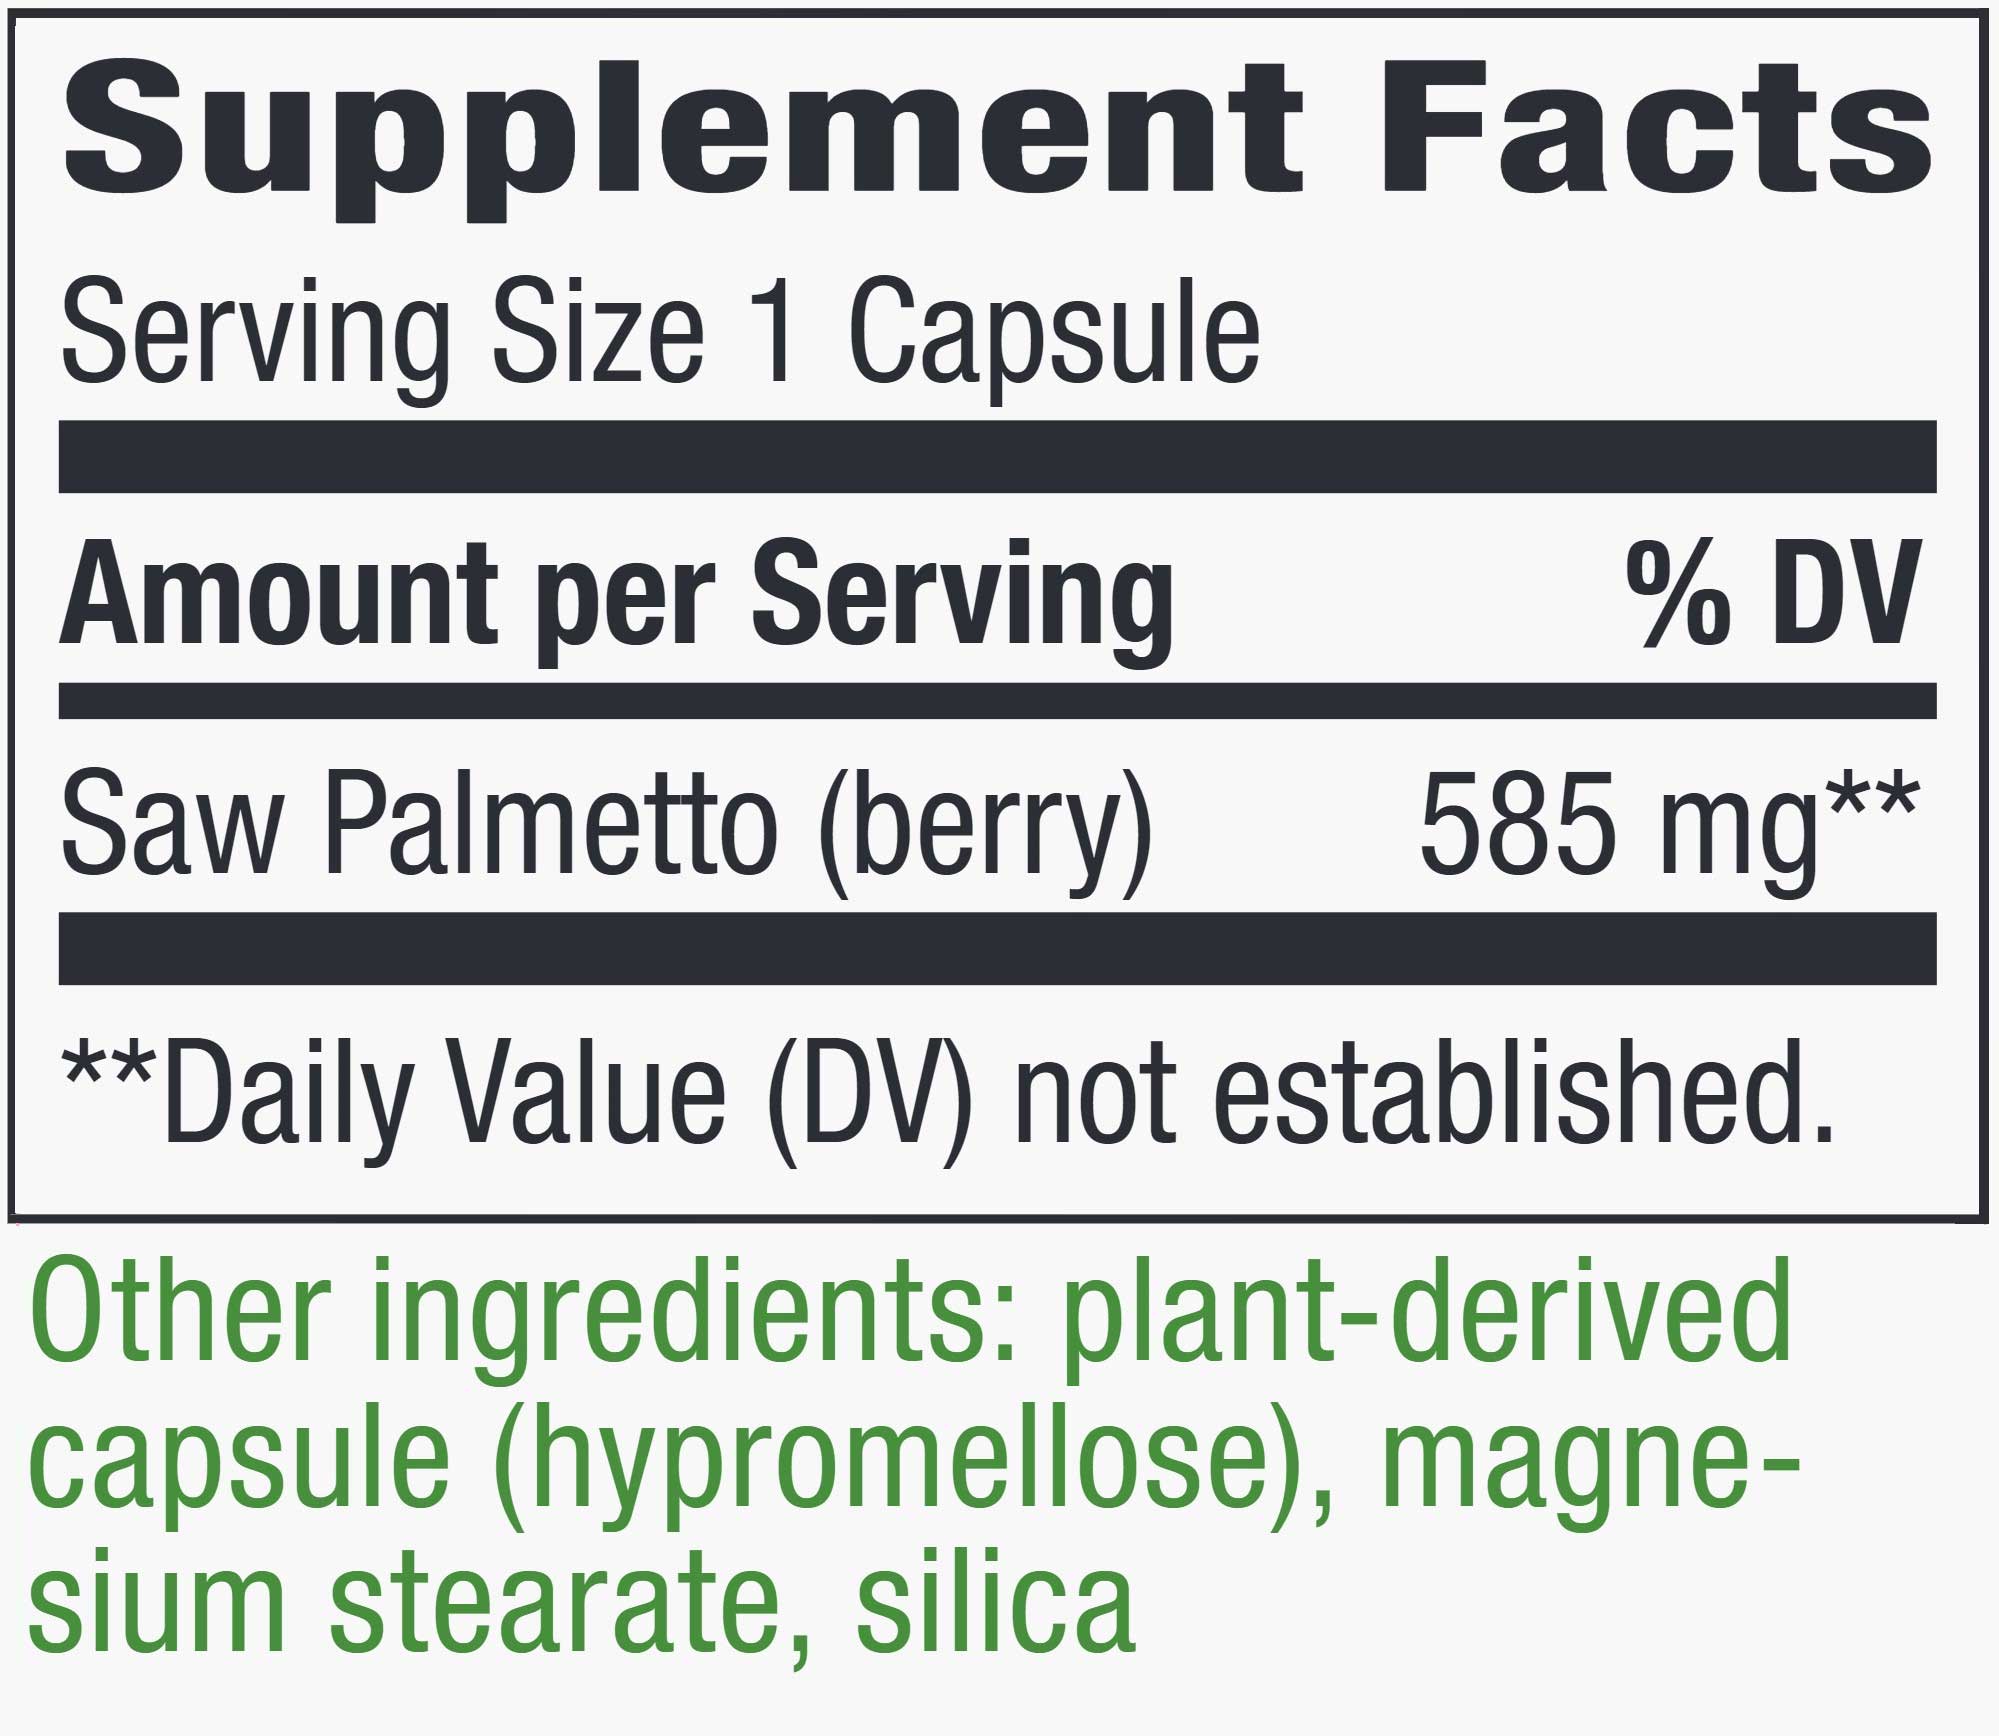 Nature's Way Saw Palmetto Berries Ingredients